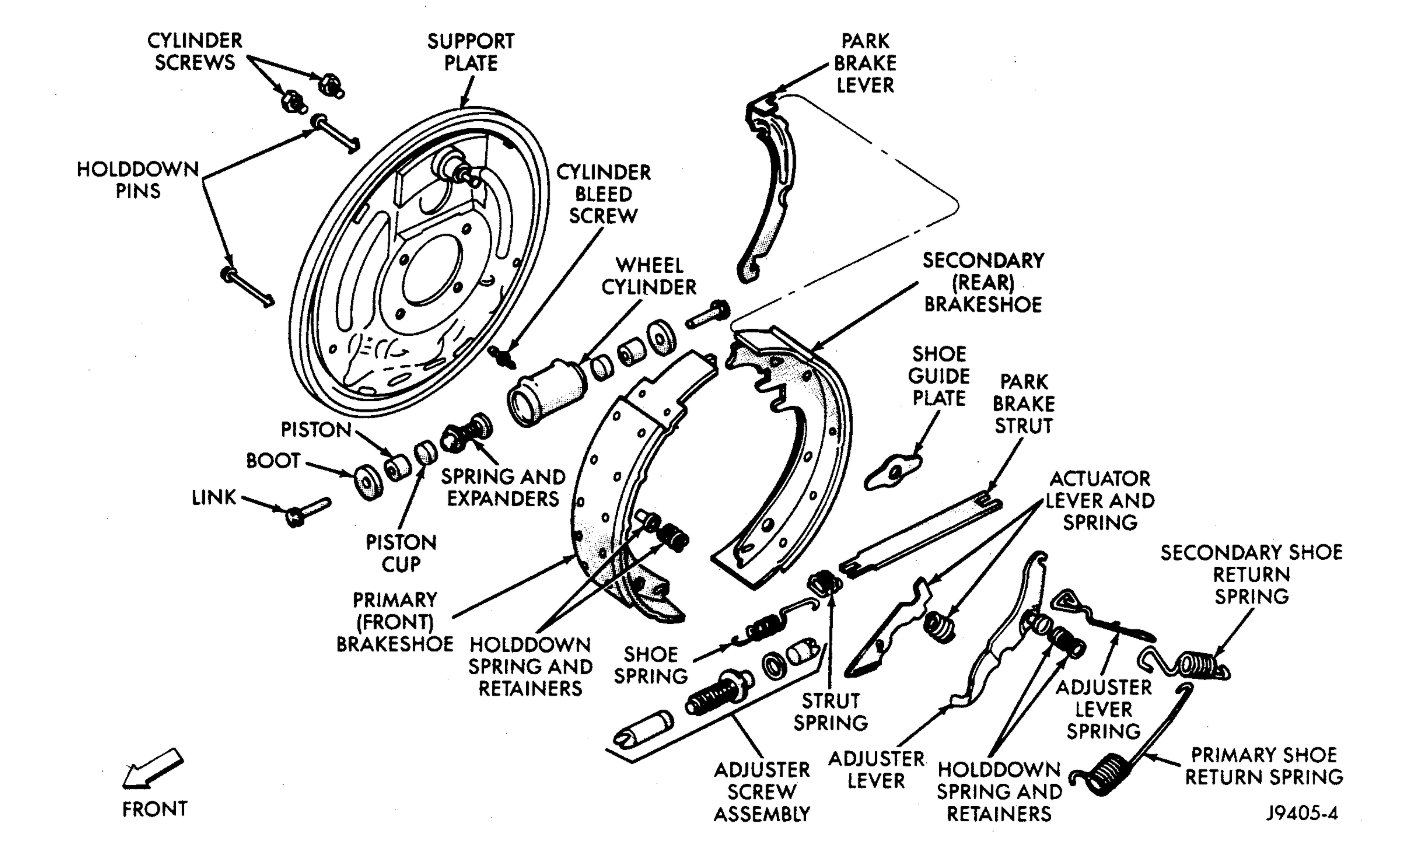 Yes. https://www.2carpros.com/articles/how-to-replace-rear-brake-shoes-and-drums...